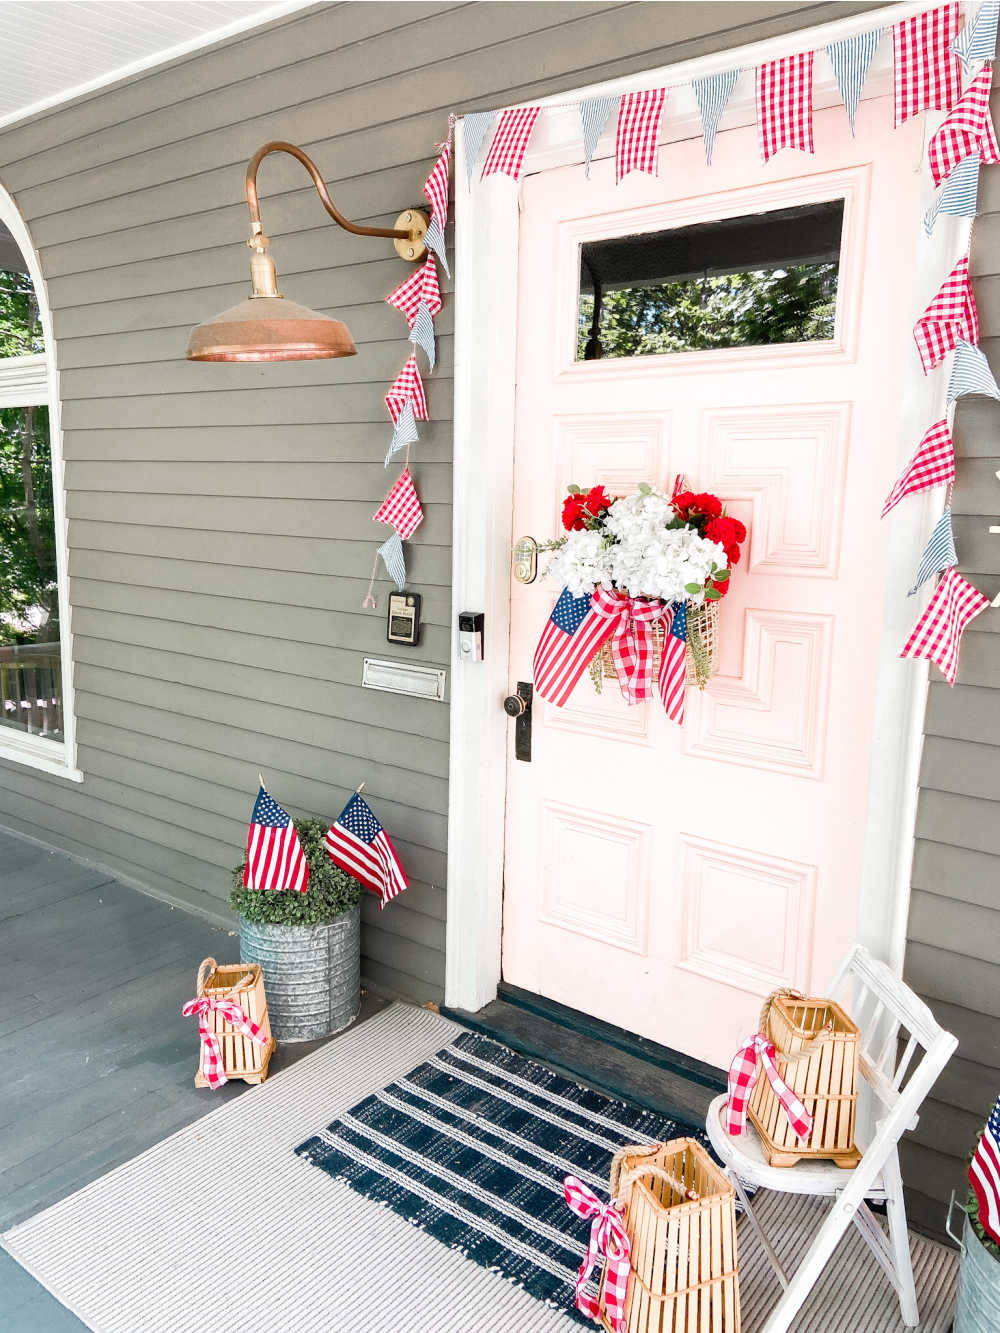 10-Minute Patriotic Basket Wreath. Make an easy and festive fourth of july wreath in just minutes!